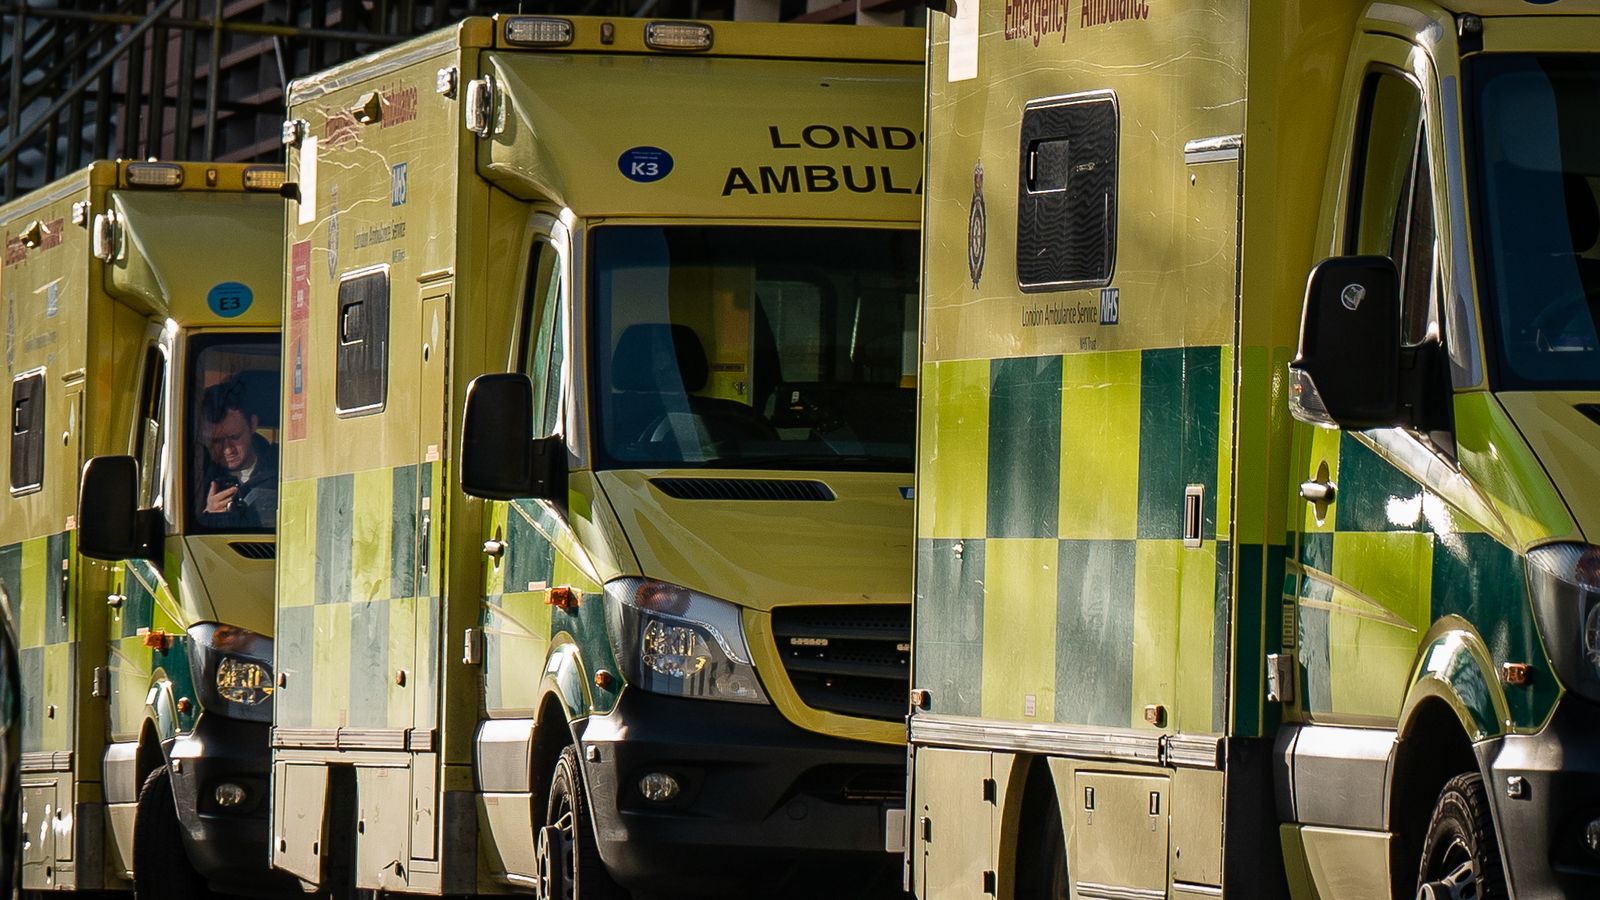 NHS figures: Ambulance delays slowly improving after record waits over Christmas